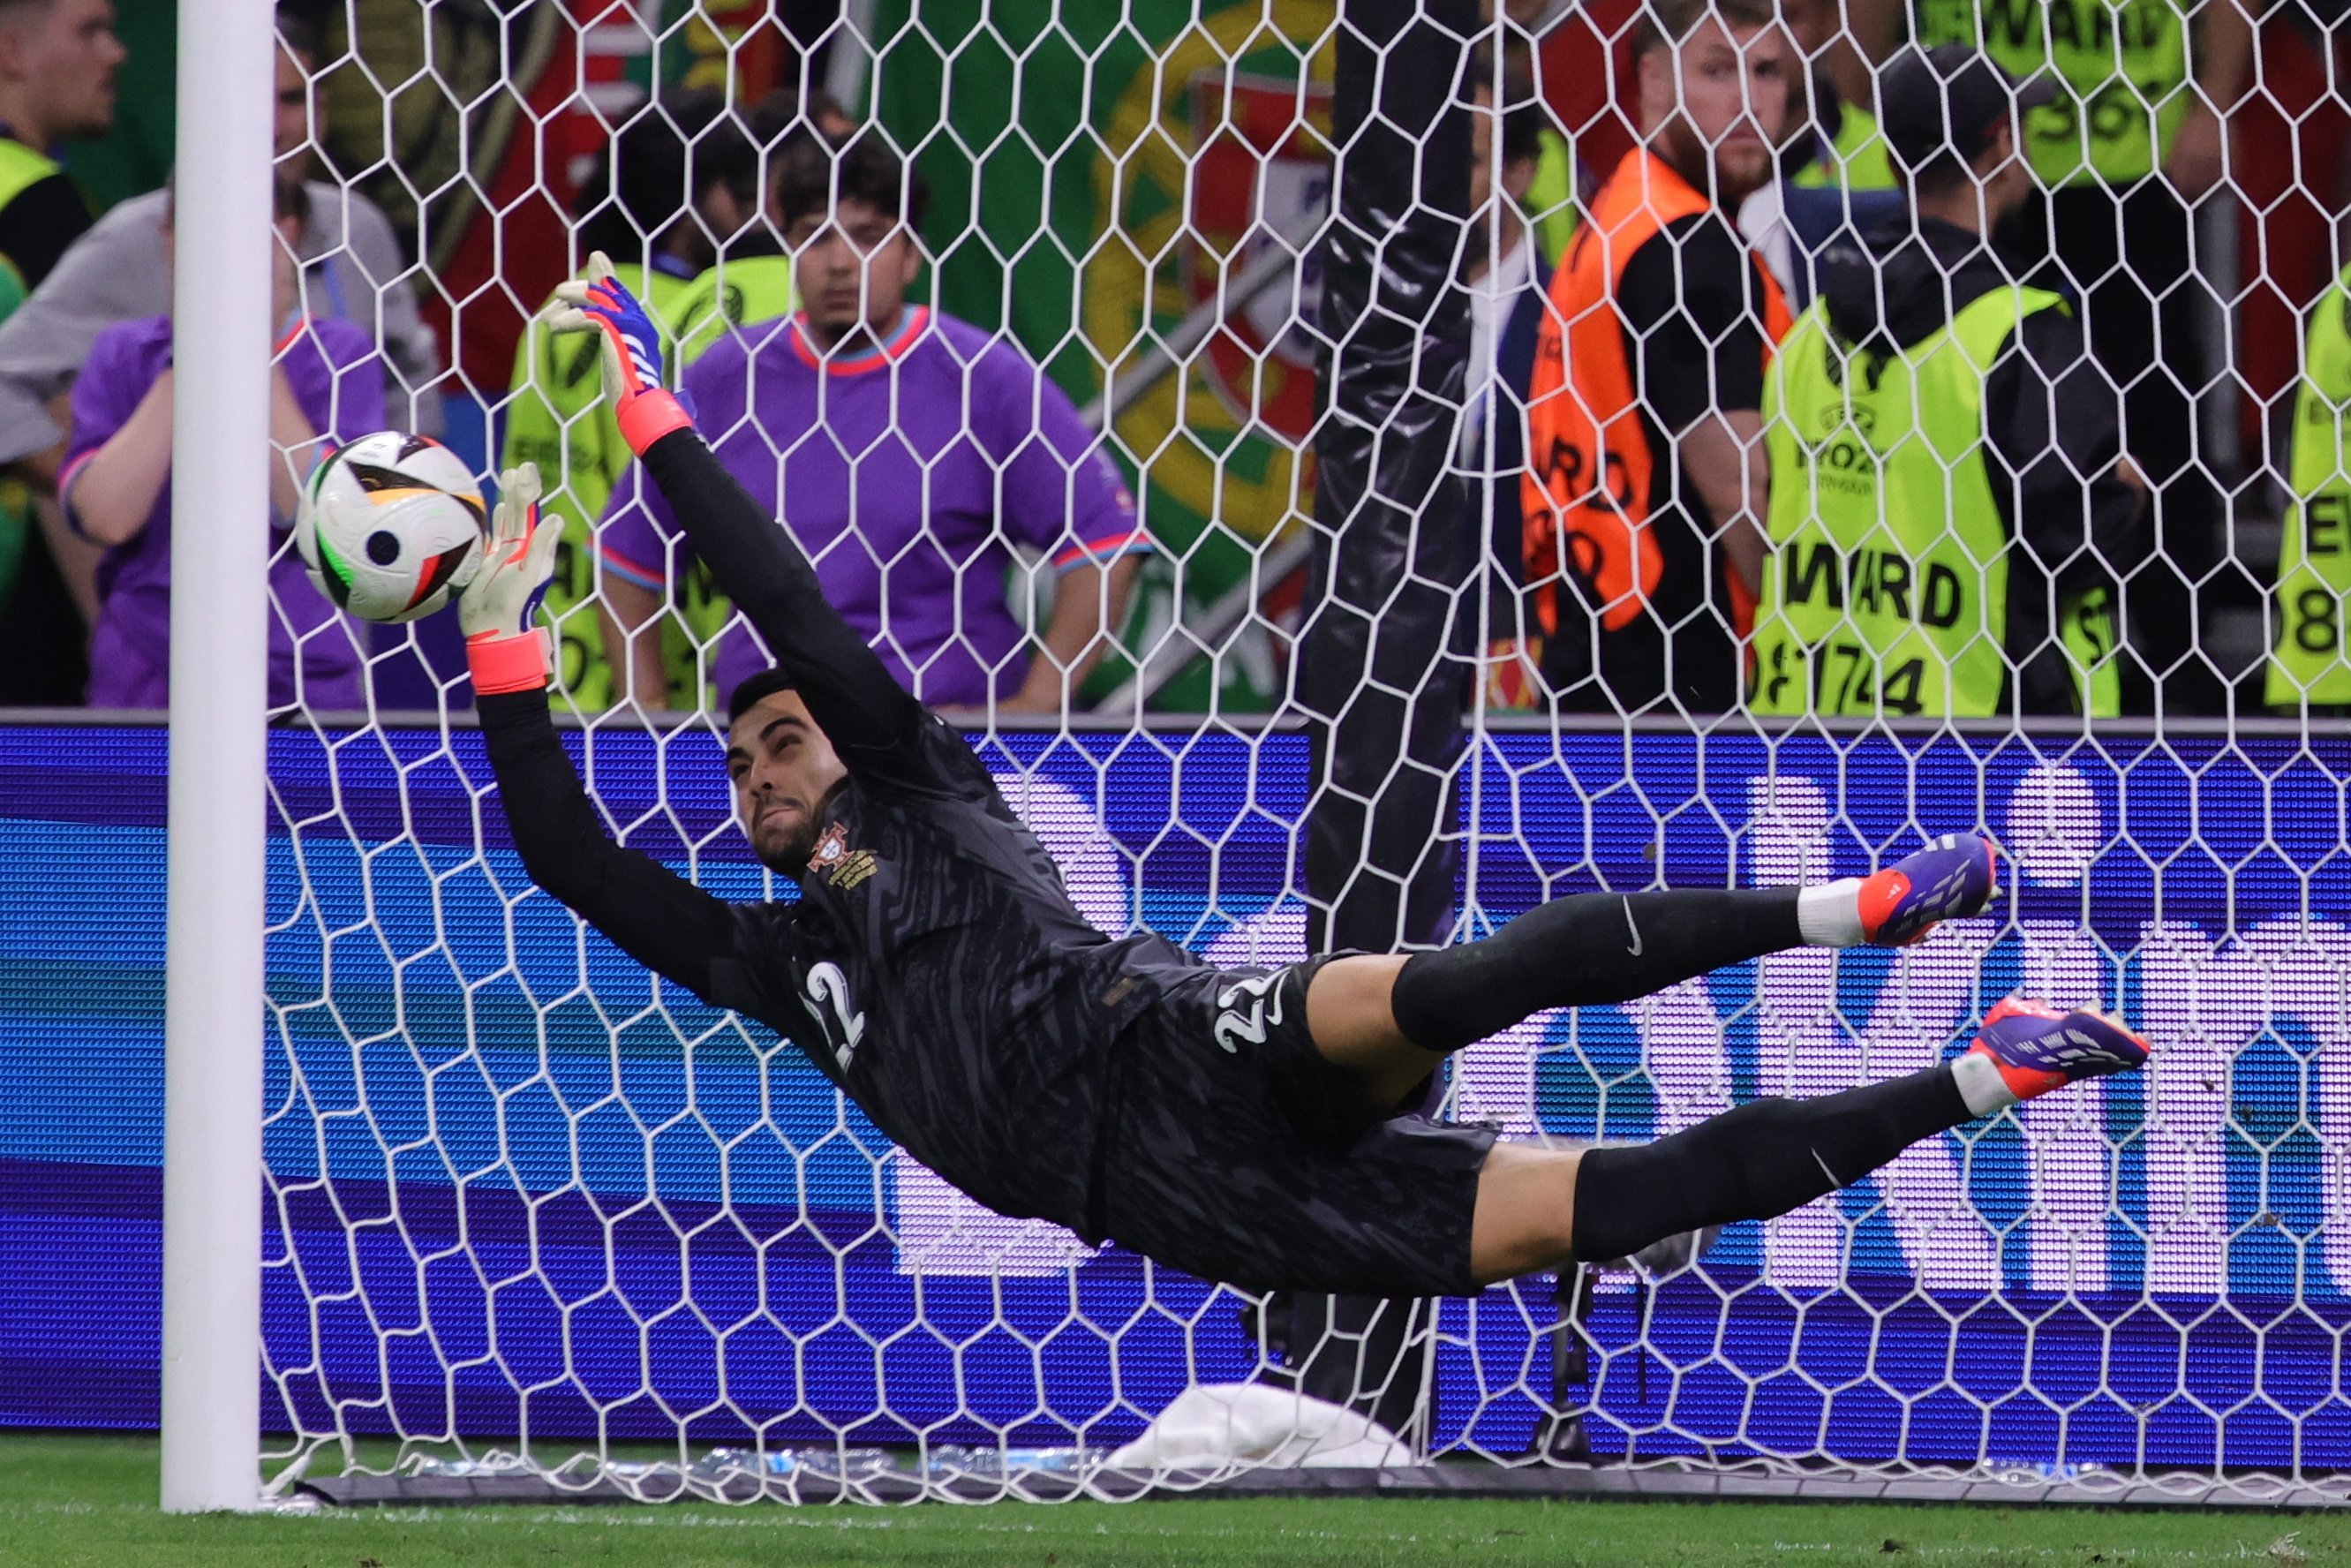 Portugal goalkeeper Diogo Costa saves a penalty during the shootout against Slovenia, in Frankfurt, Germany on Monday. Photo: EPA-EFE